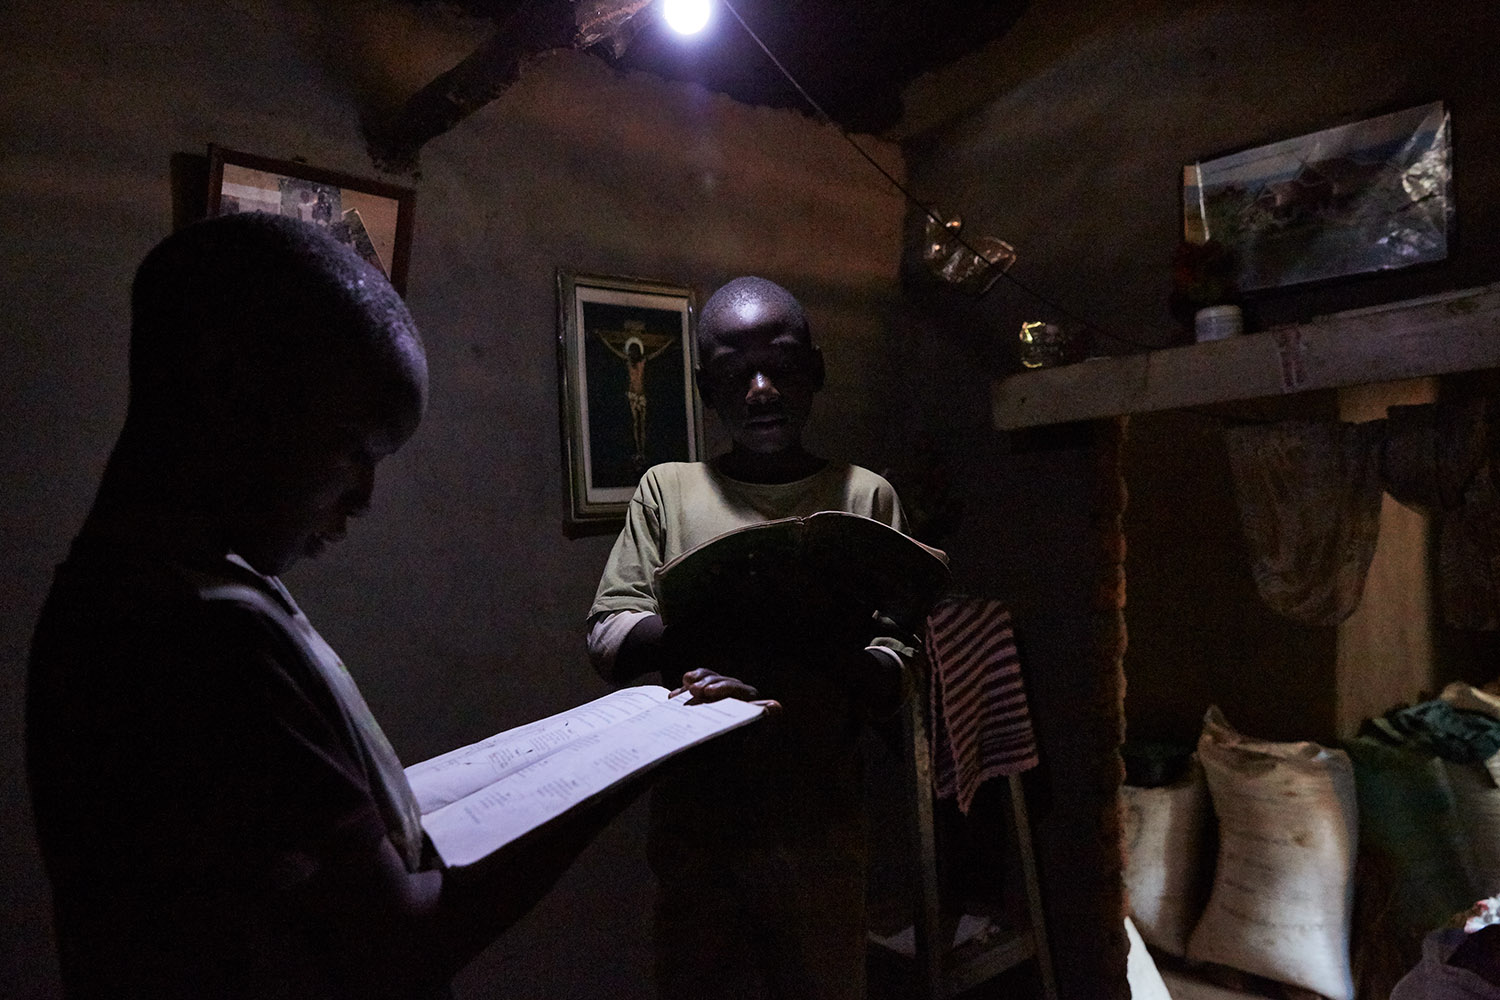  Jan Chumba (12) and his brother Ben (10) studying at home with the solar battery powered light, Luchenza, Malawi, 2017. 